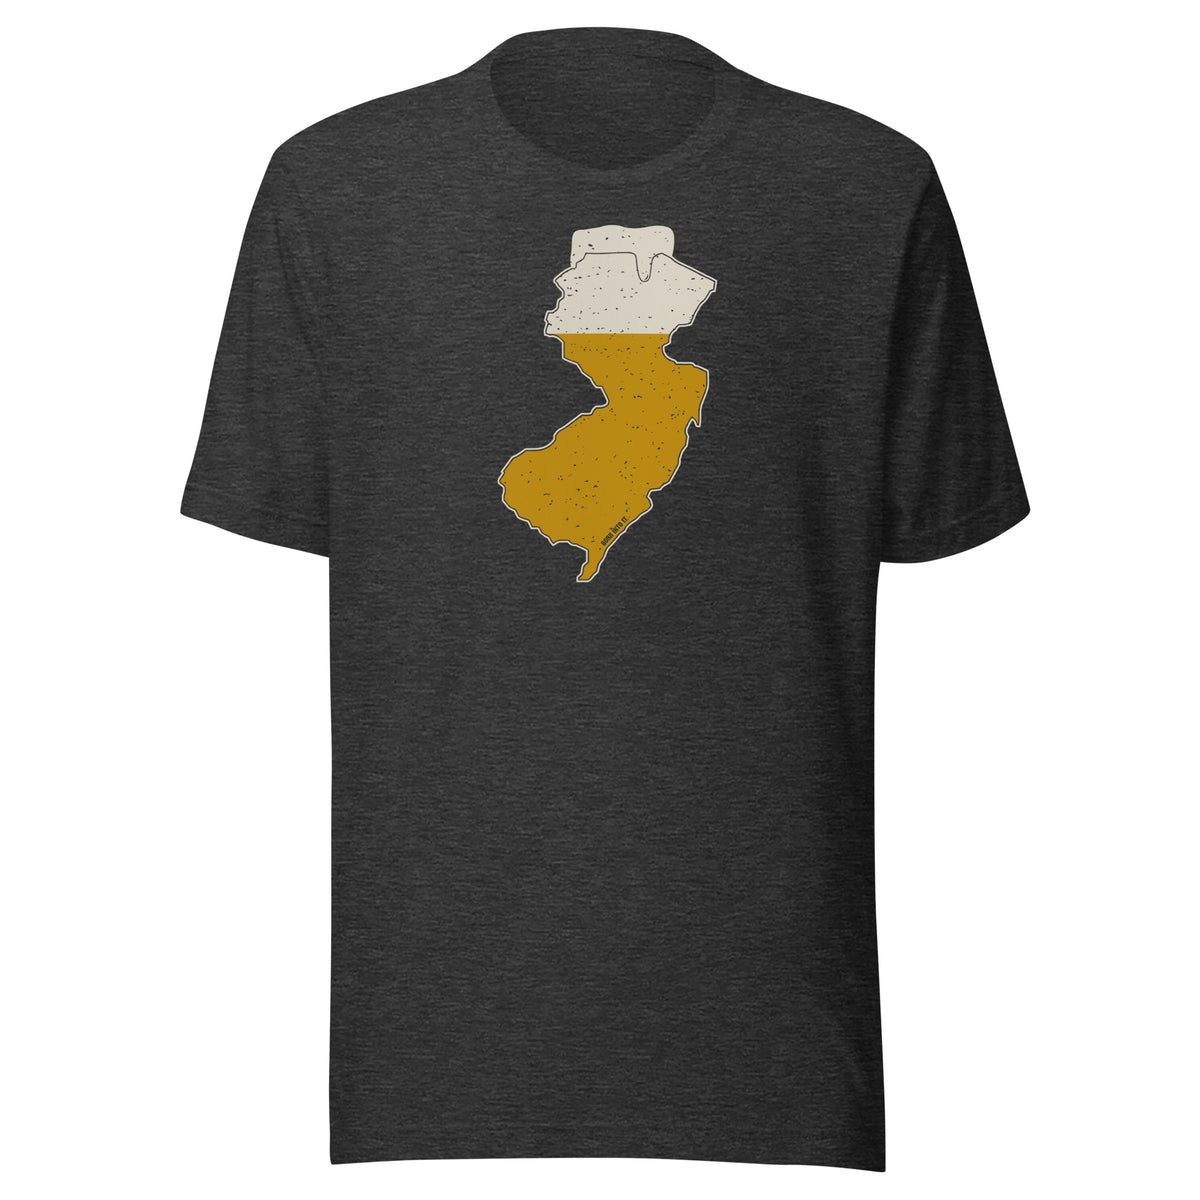 New Jersey On Tap Unisex t-shirt